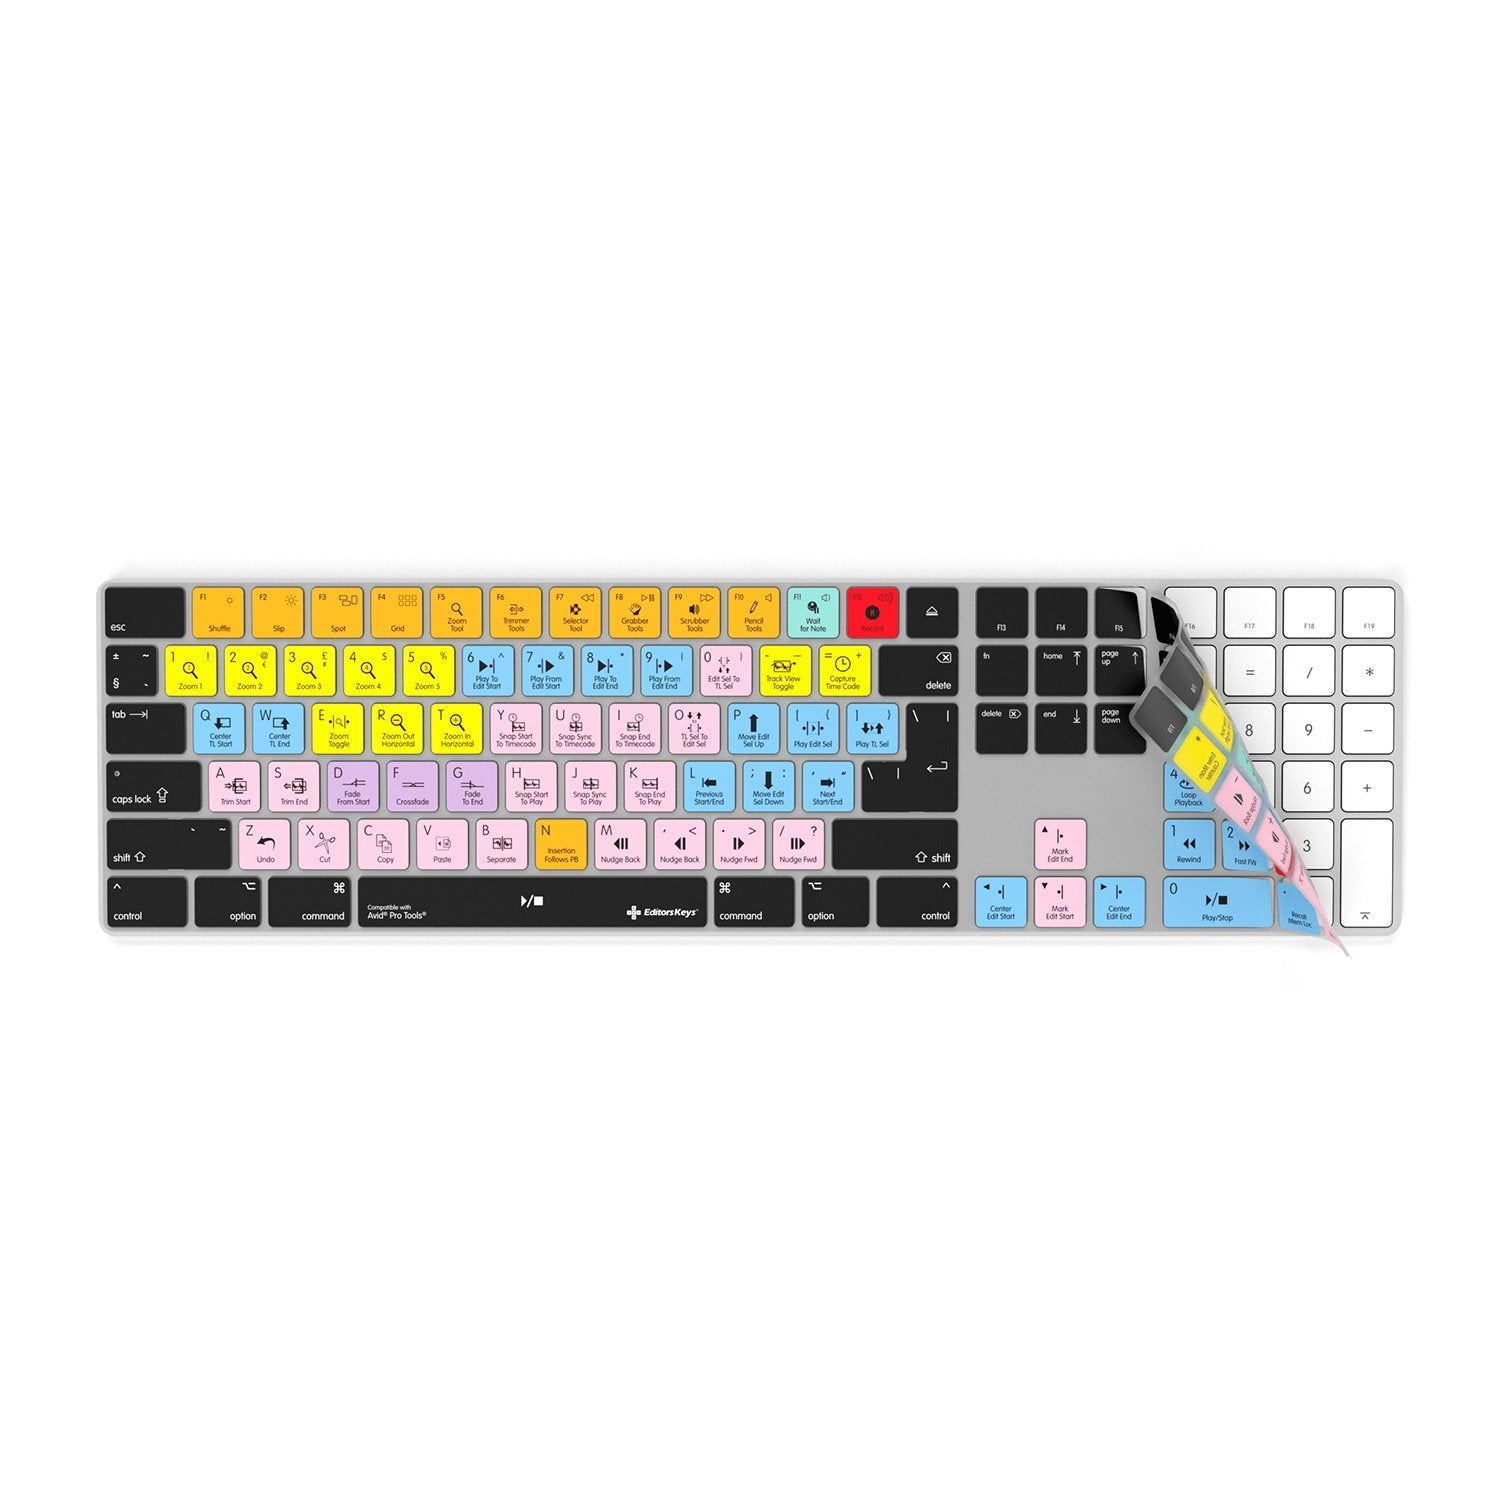 Avid Pro Tools Keyboard Covers for MacBook and iMac